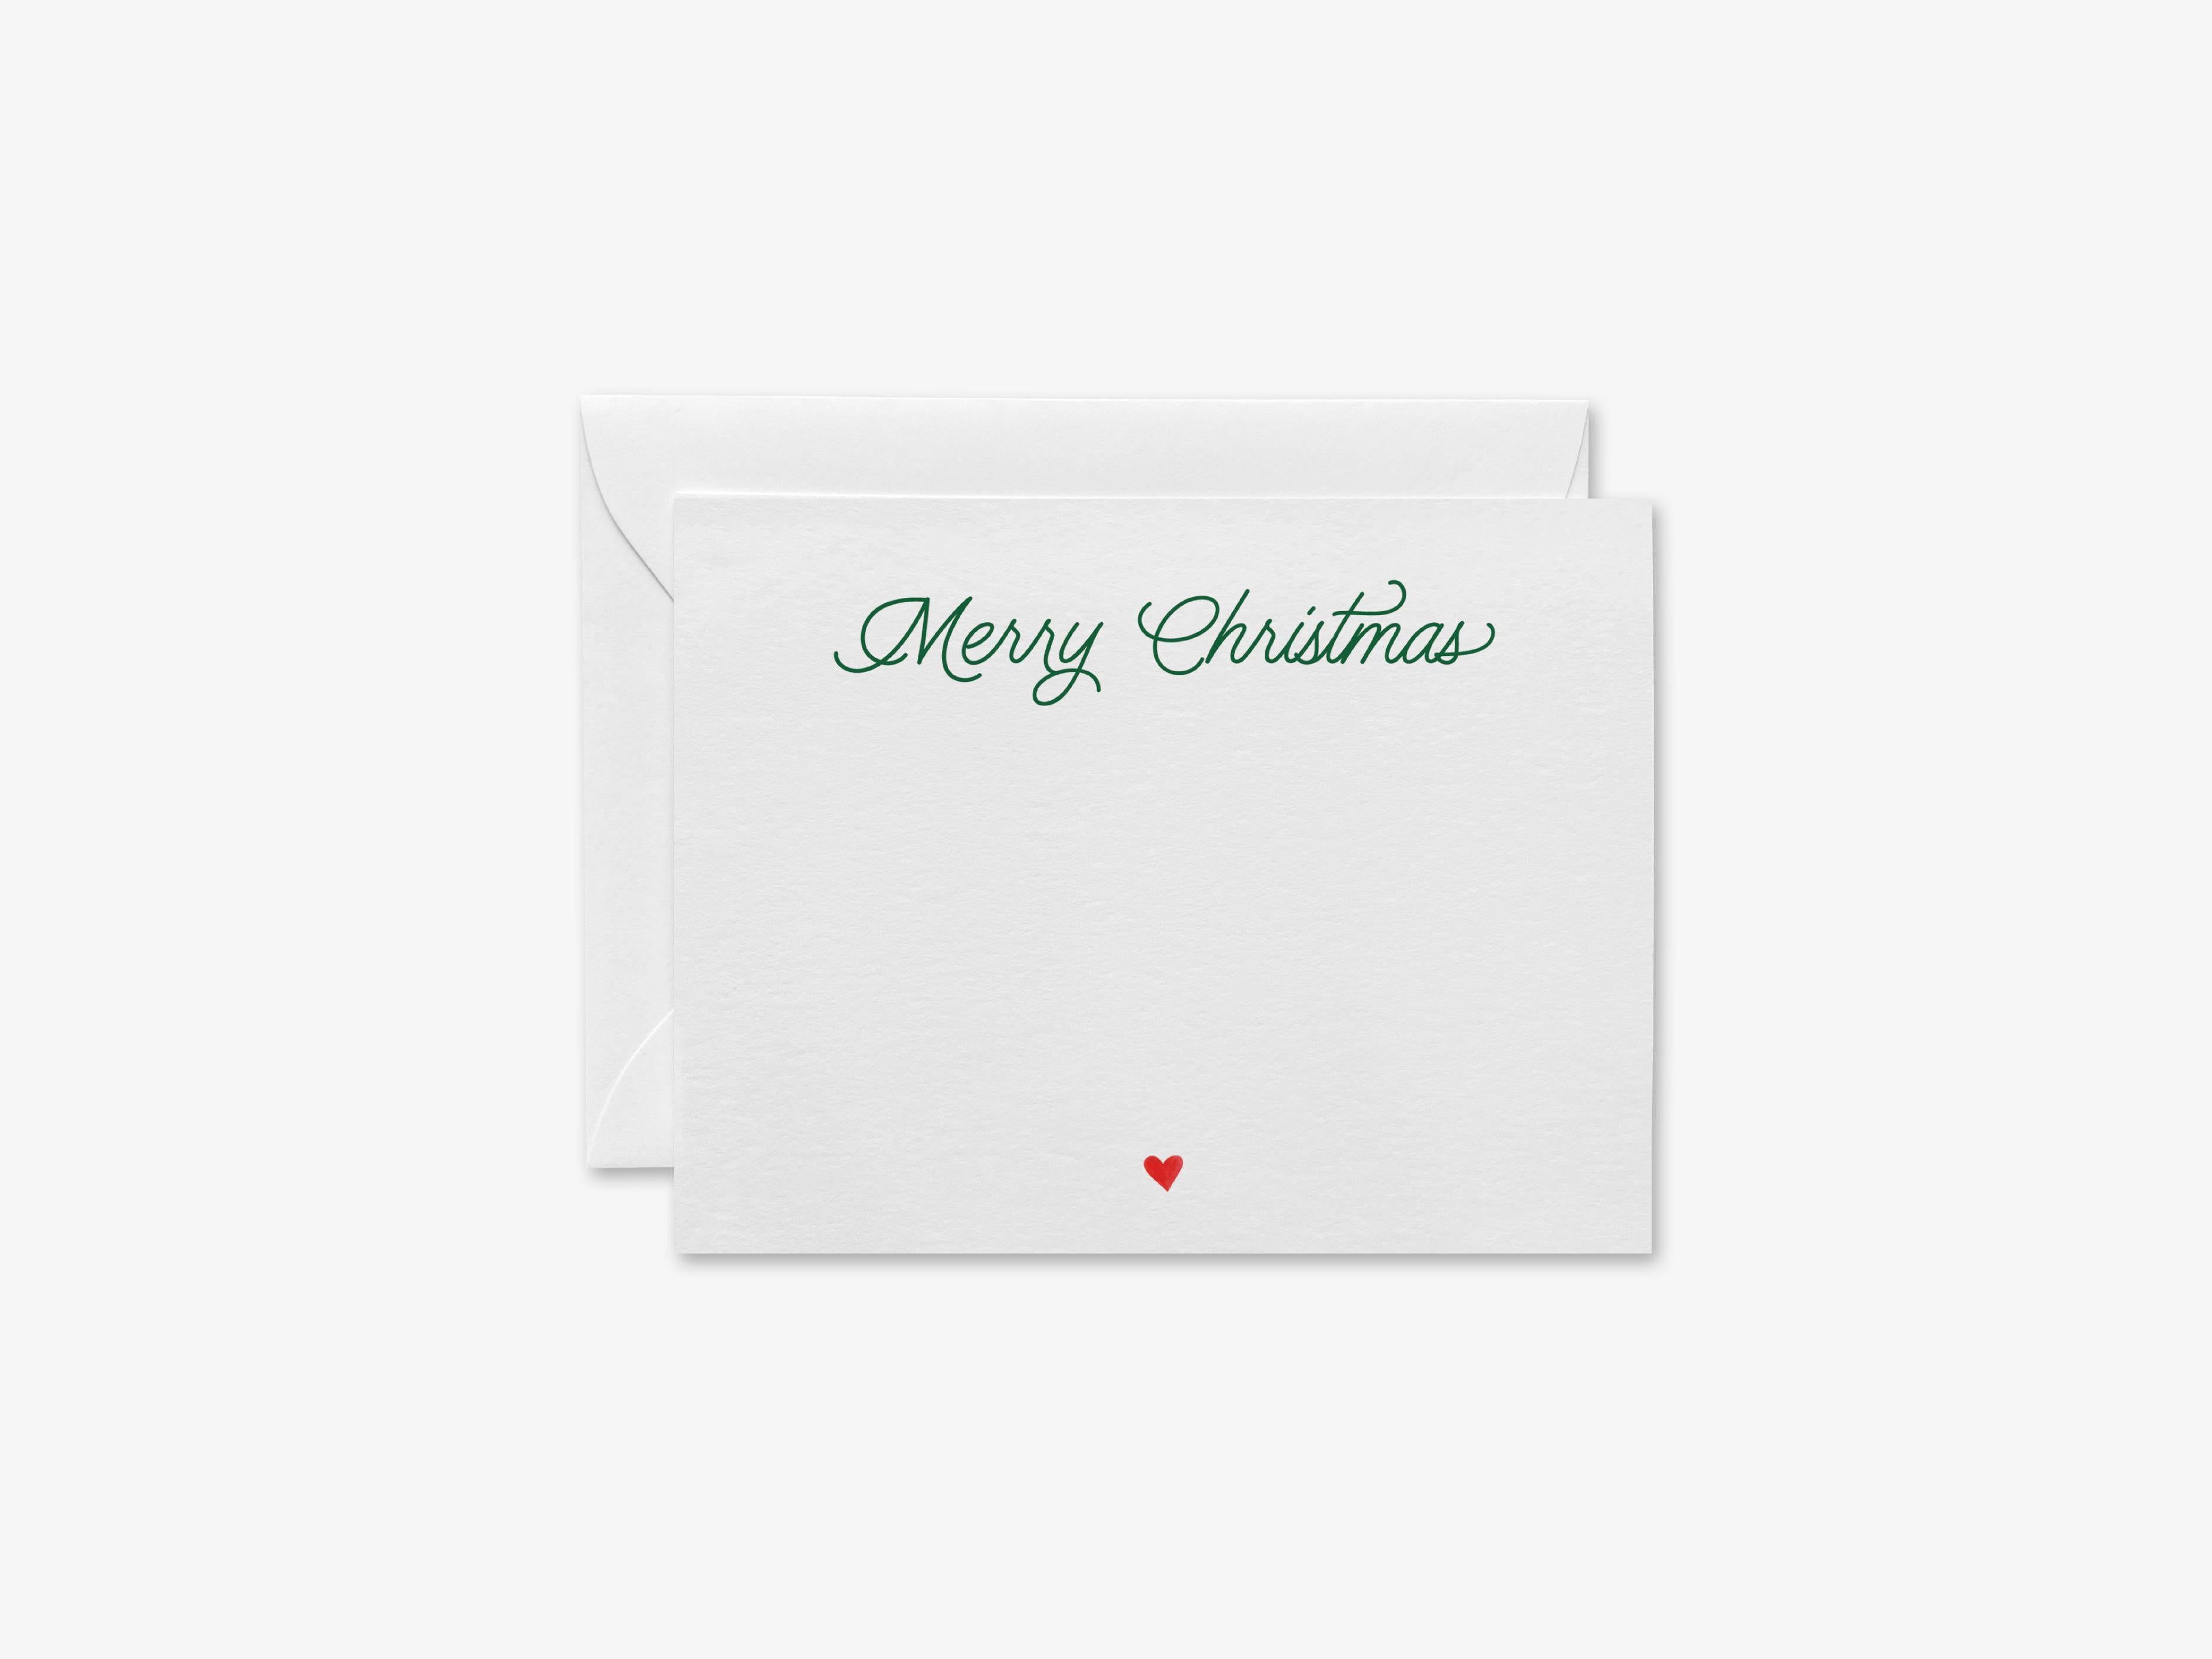 Merry Christmas Script Flat Notes [Sets of 8]-These flat notecards are 4.25x5.5 and feature our hand-painted watercolor heart and red and green script print, printed in the USA on 120lb textured stock. They come with white envelopes and make great thank yous and gifts for the holiday lover in your life.-The Singing Little Bird